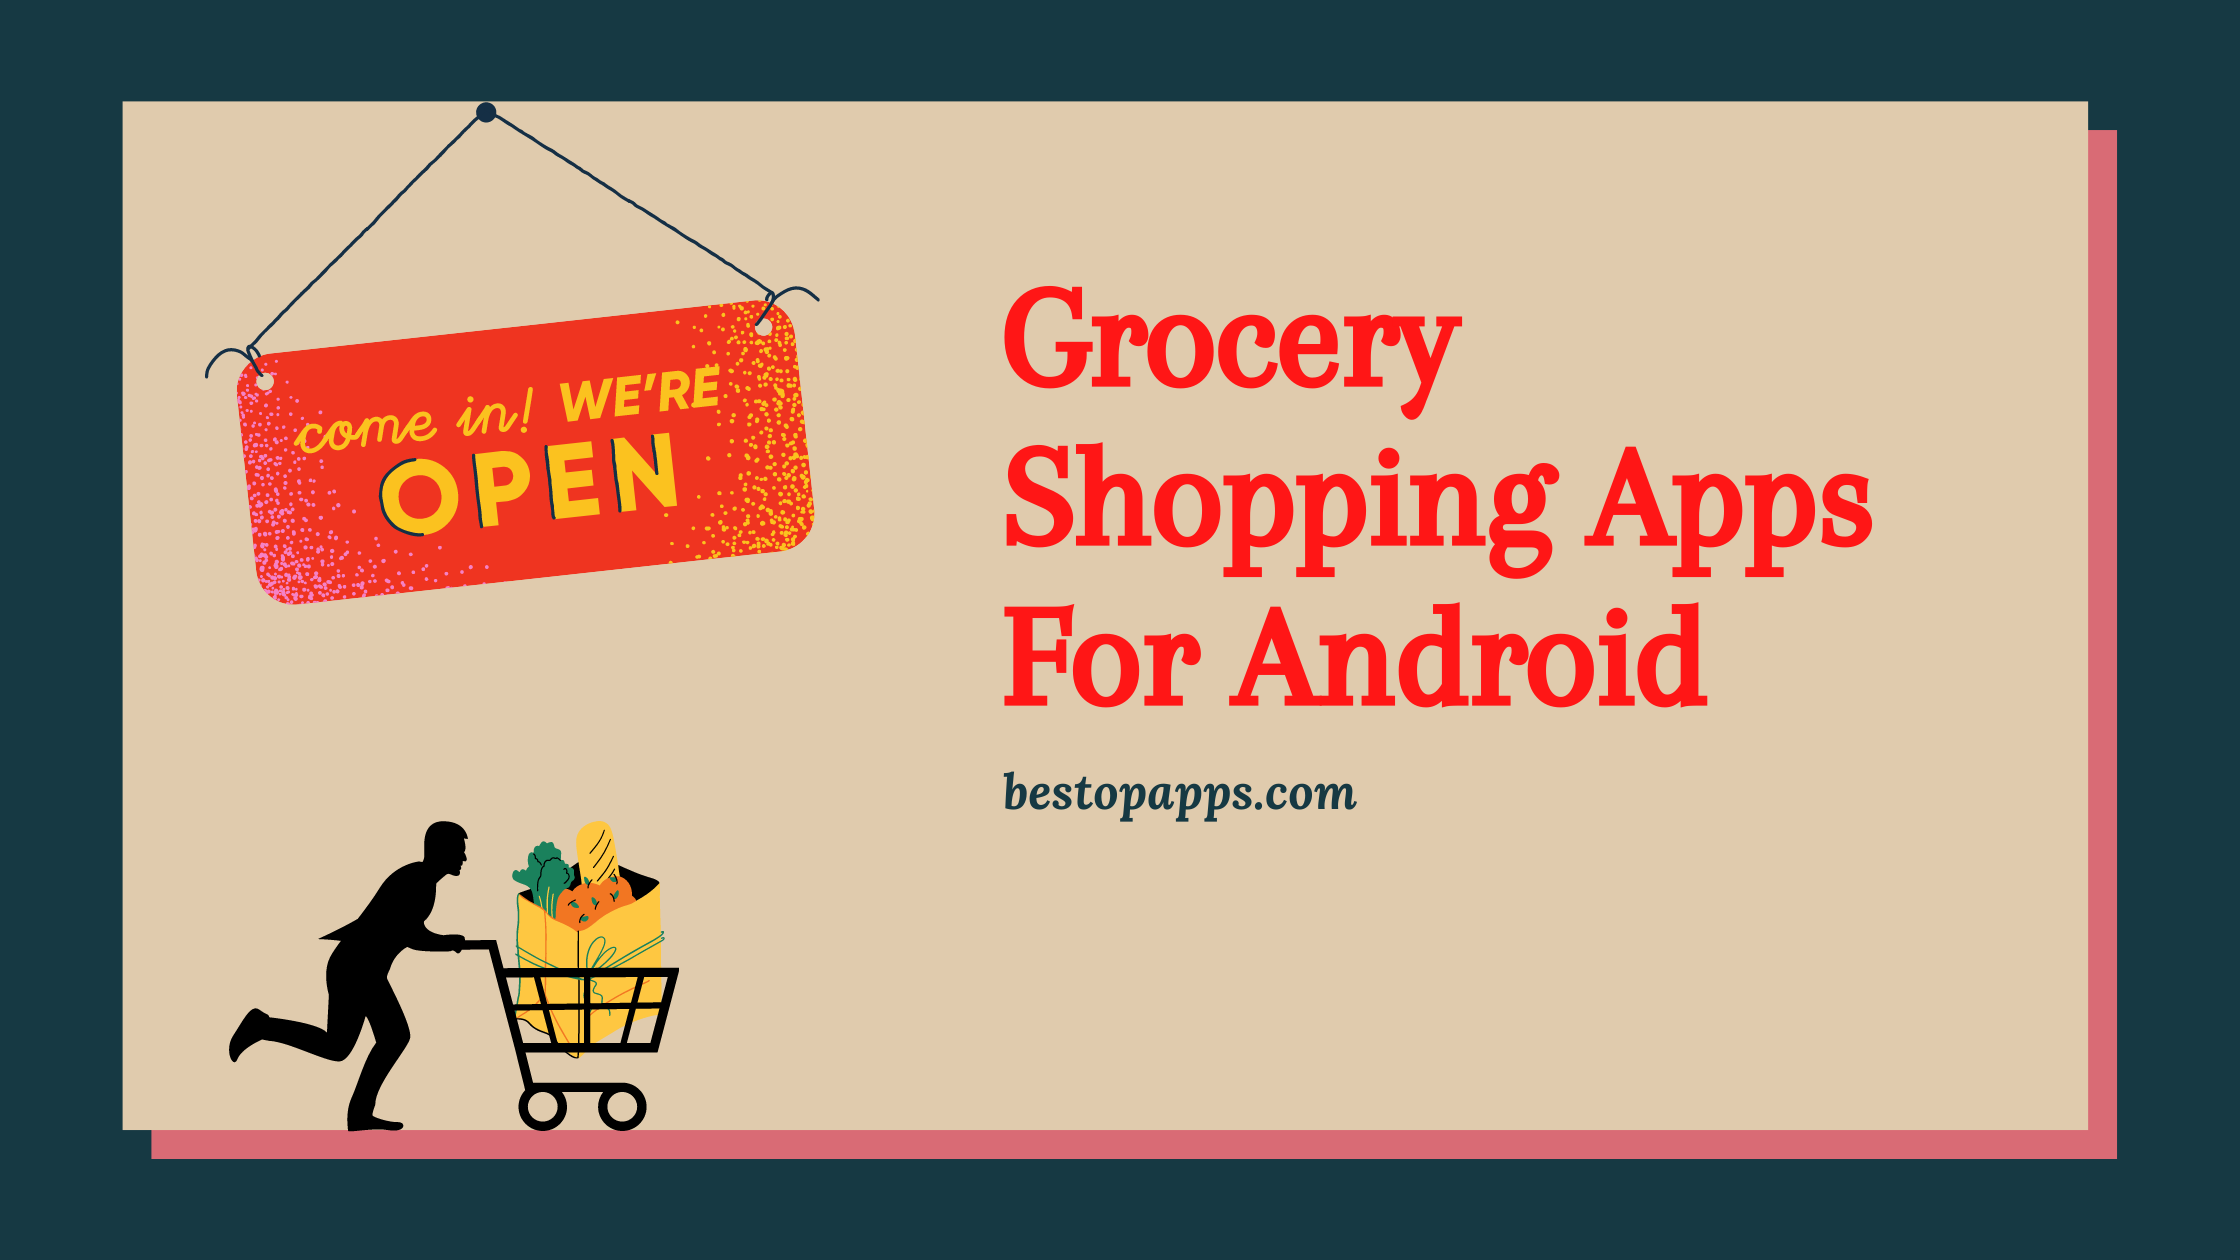 Grocery Shopping Apps For Android